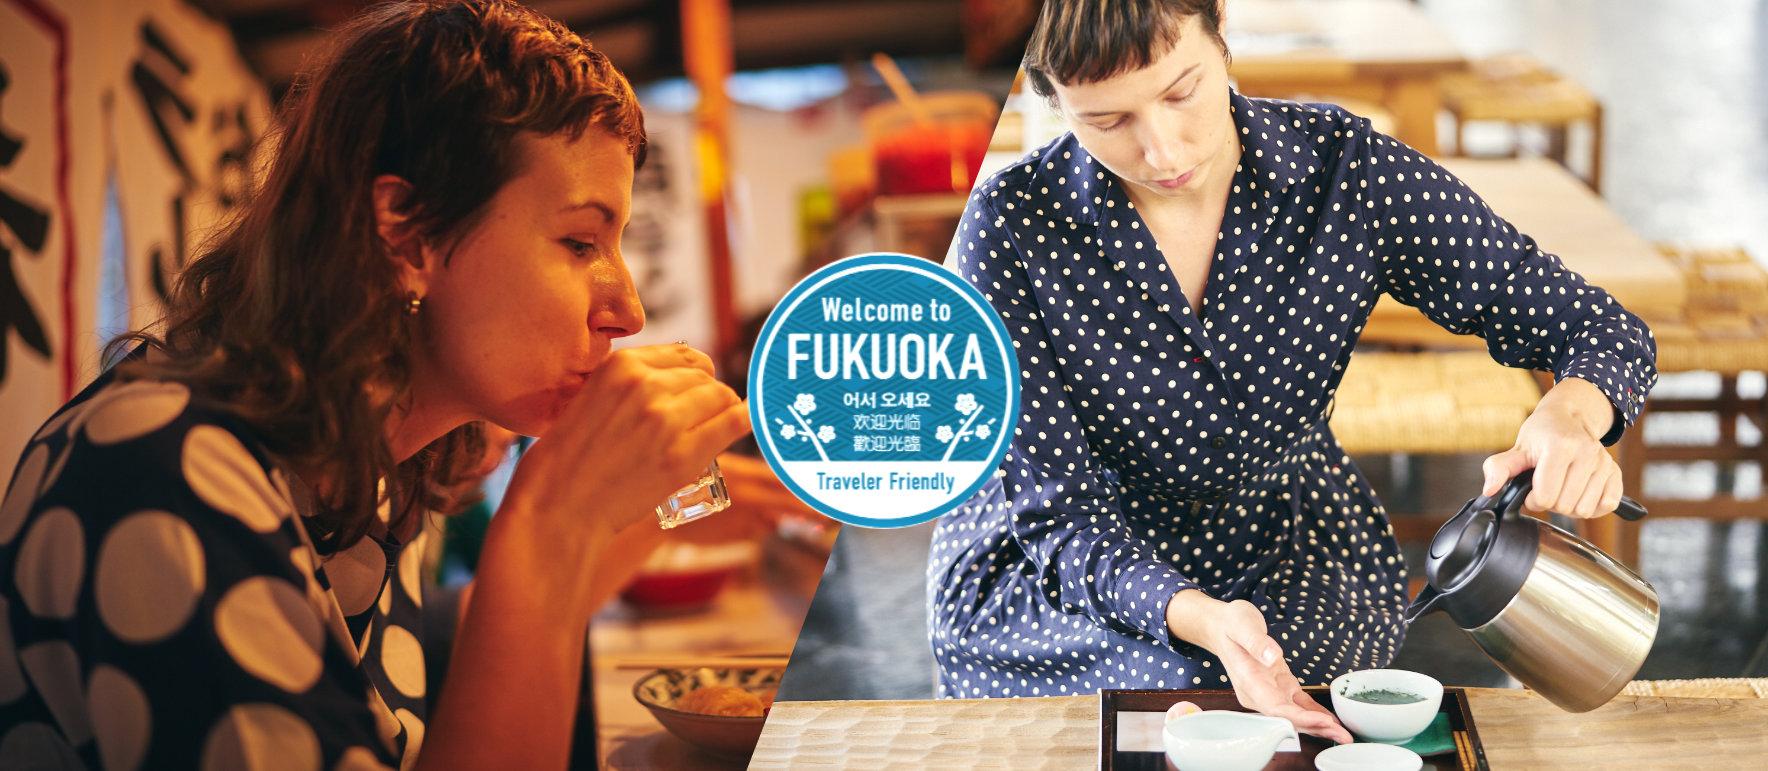 Enjoy your trip to Fukuoka in your own way! Here we introduce shops that cooperate with inbound tourism.